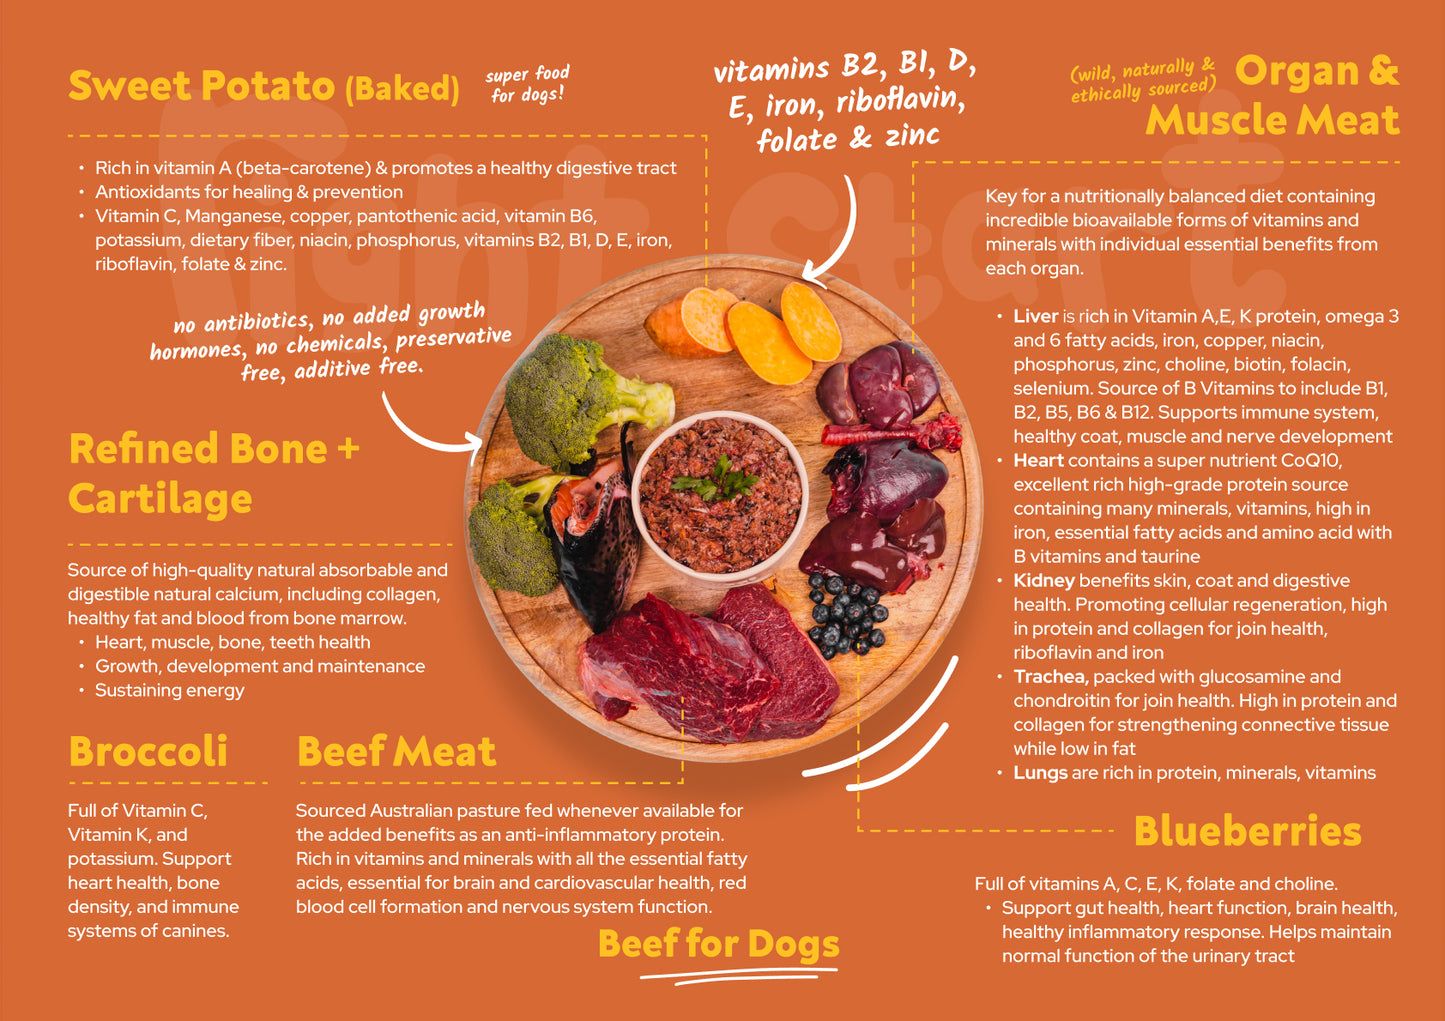 beef for dogs nutrient breakdown right start pet food. sweet potato, broccoli, blueberries, organ and muscle meat, refined bone and cartilage nothing added